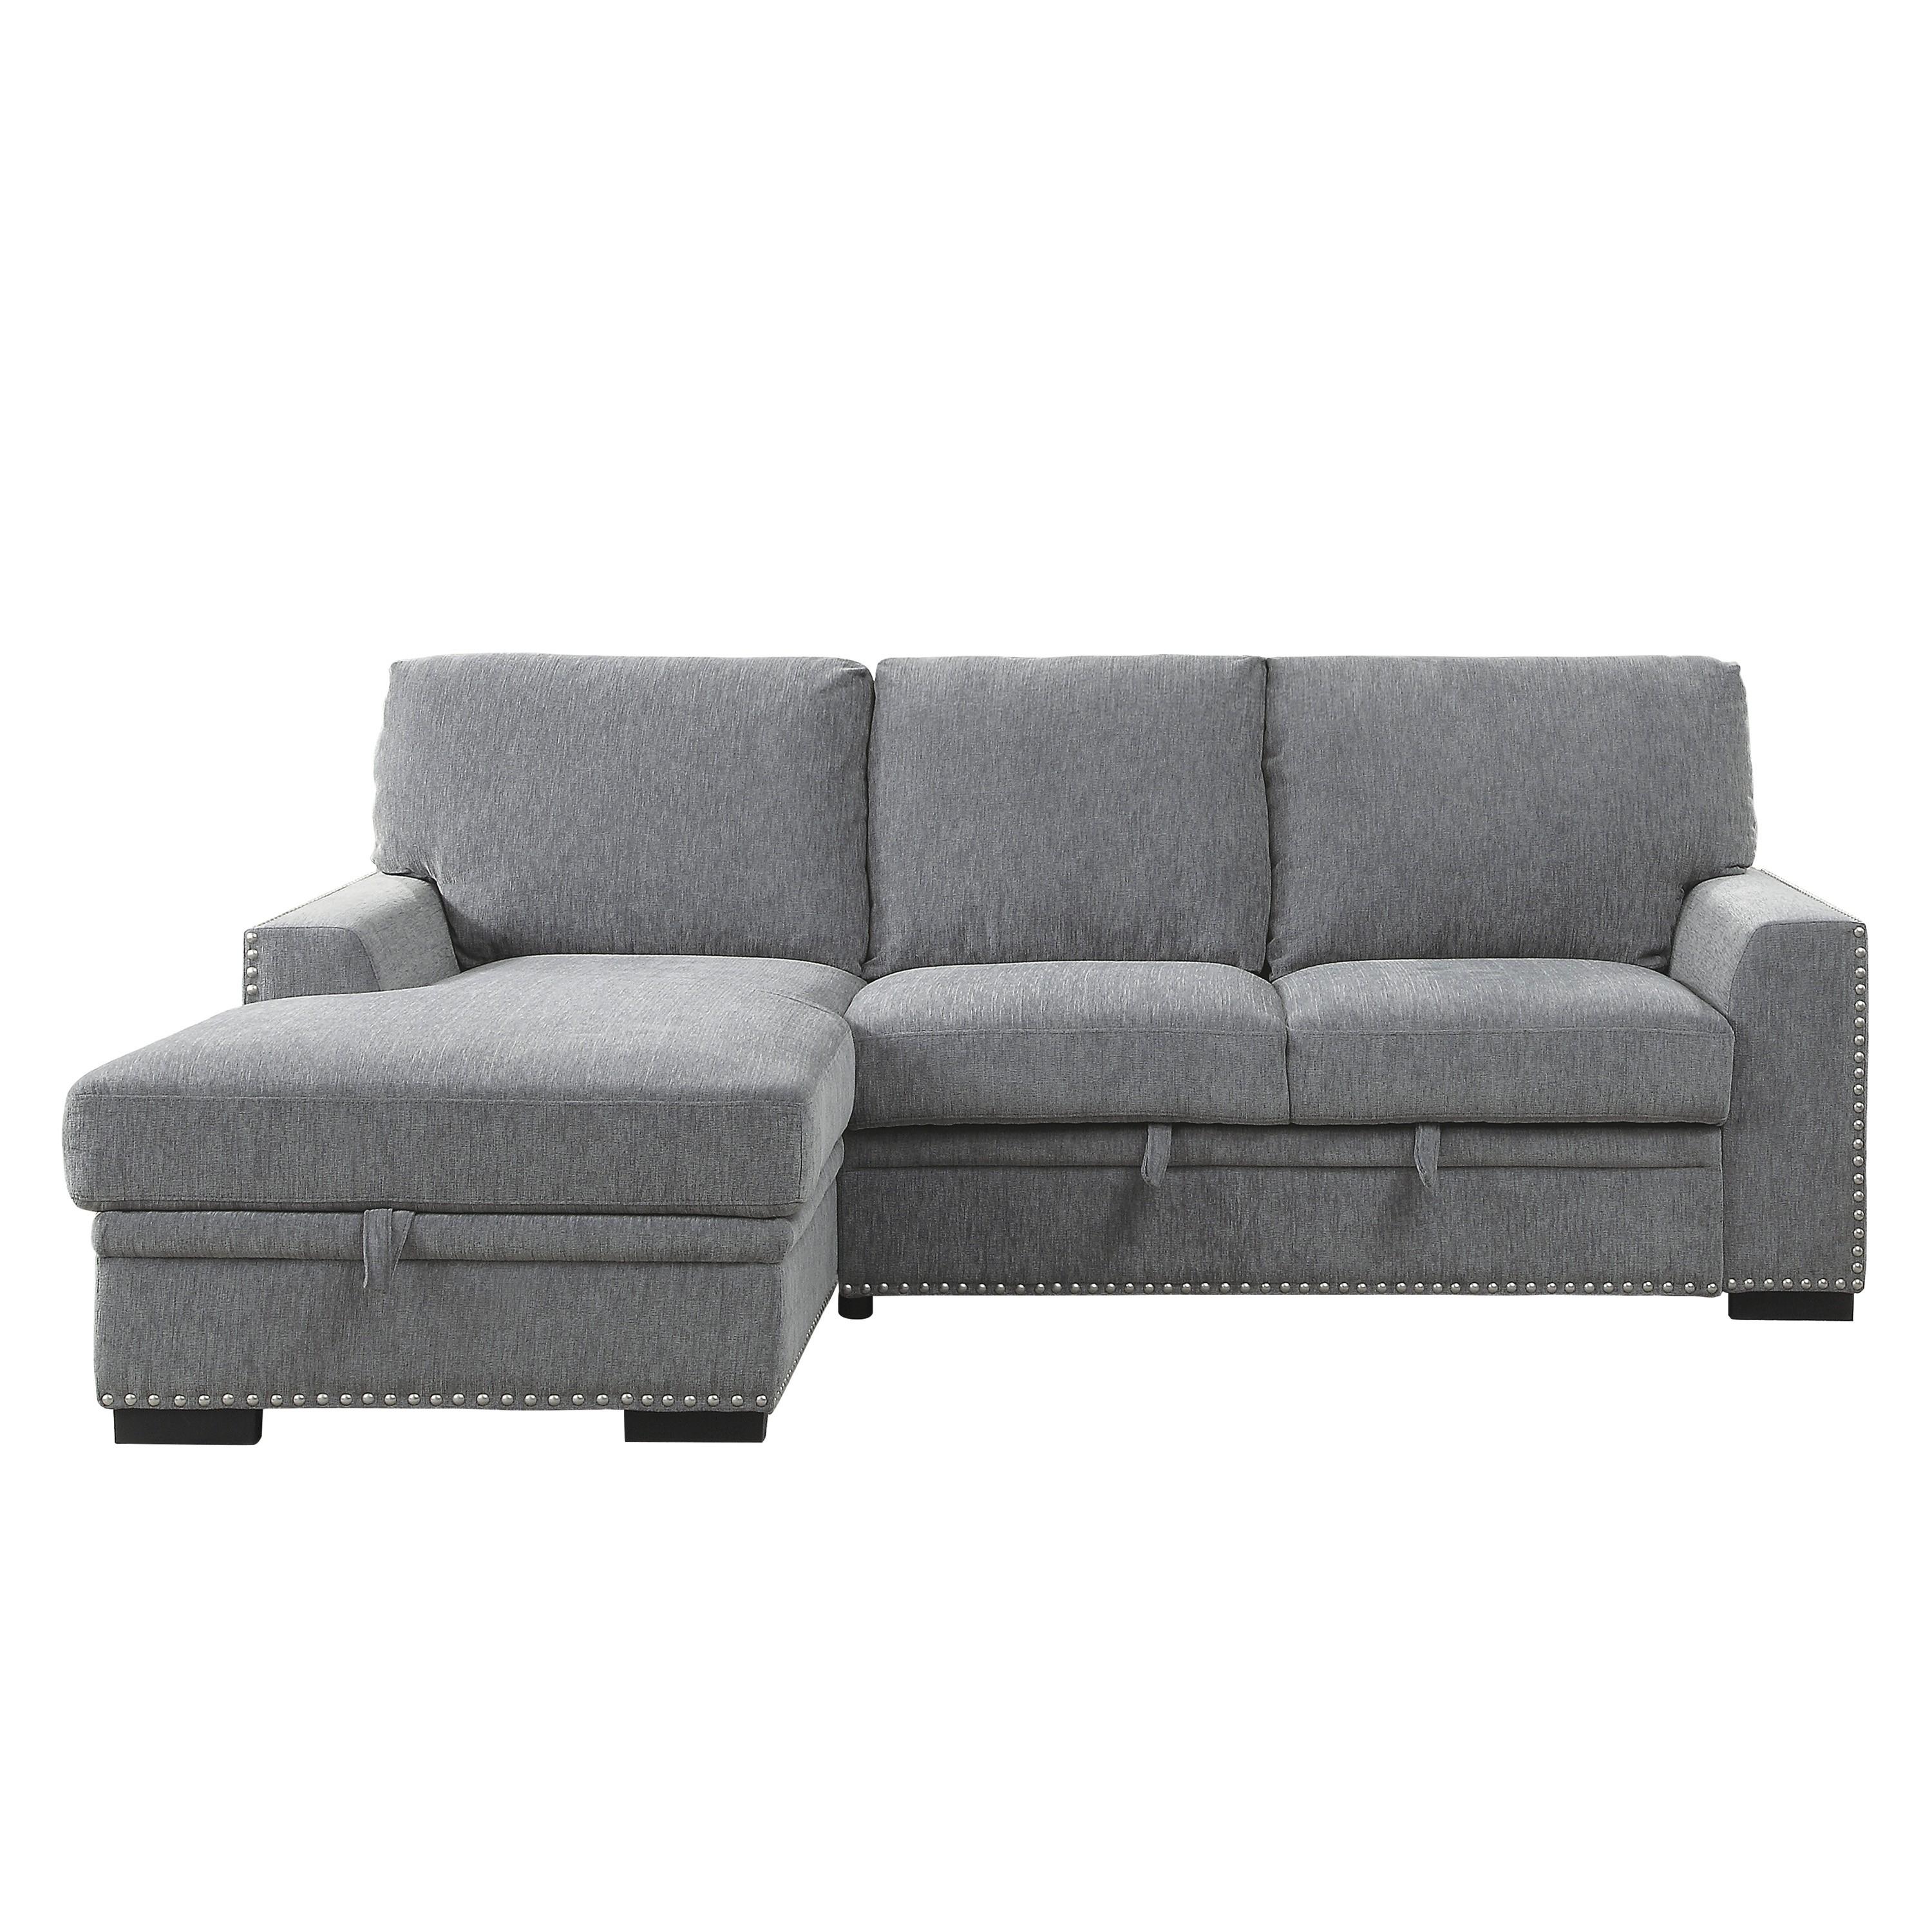 Modern Sectional 9468DG*2LC2R Morelia 9468DG*2LC2R in Gray Chenille